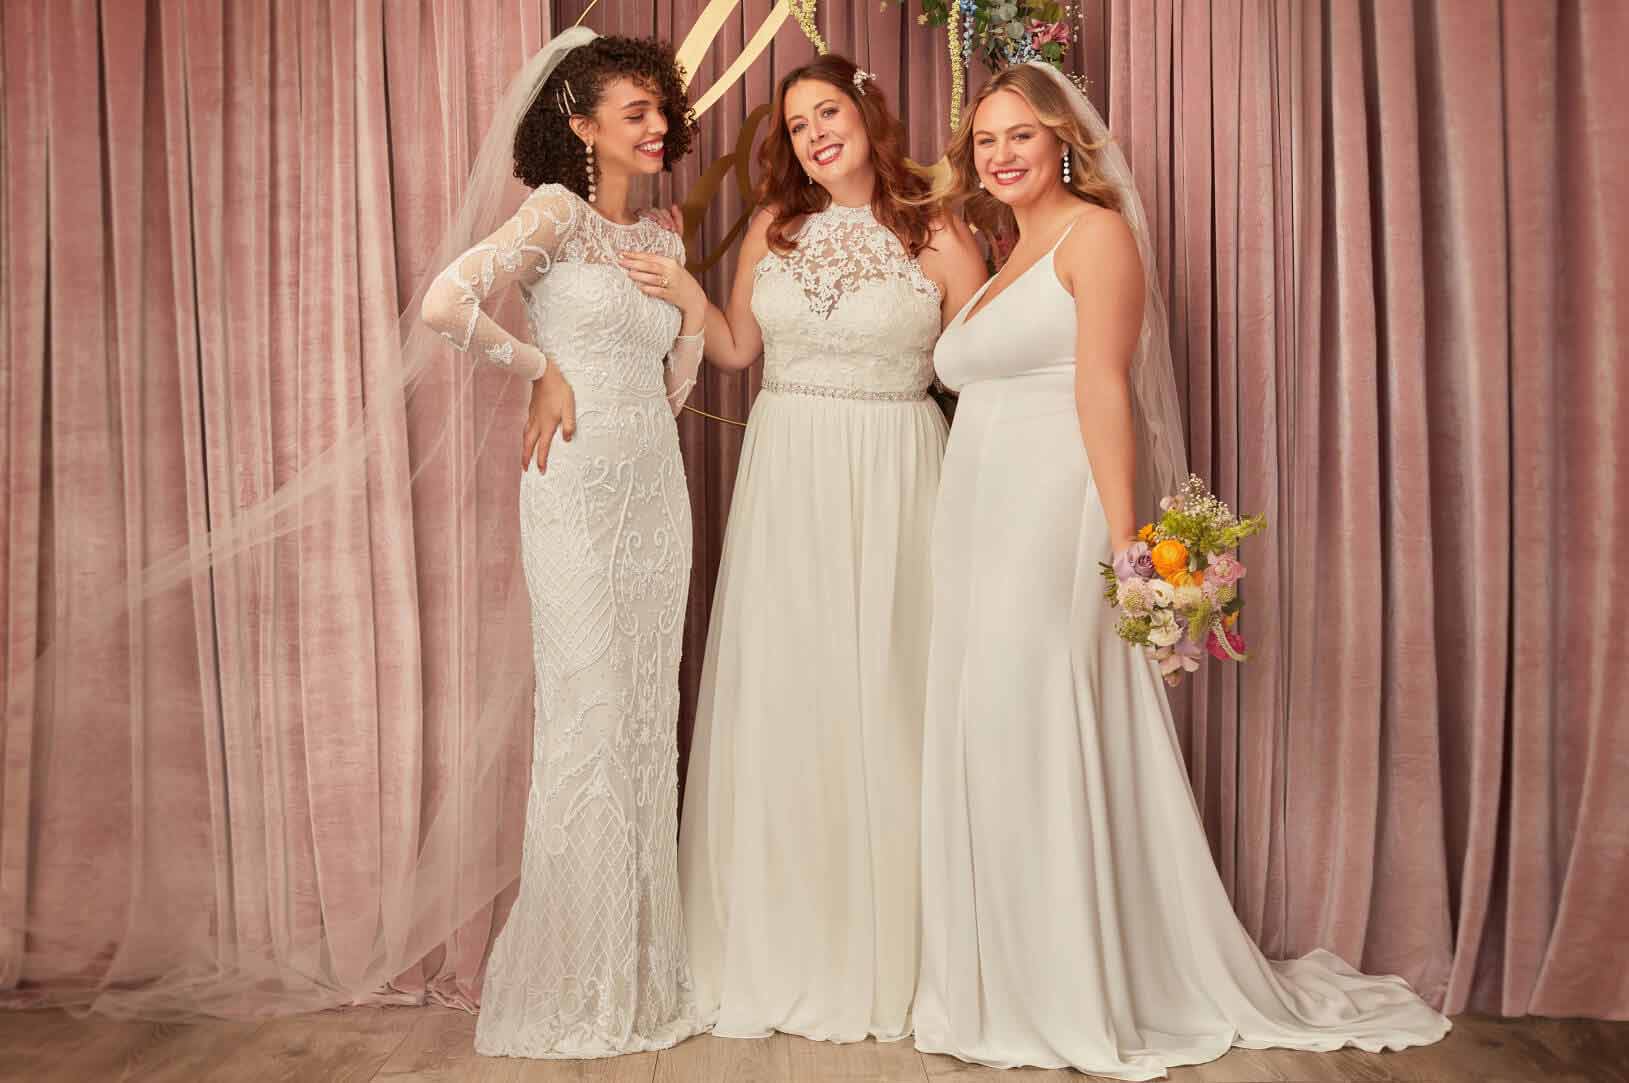 3 brides in different wedding dresses standing next to each other